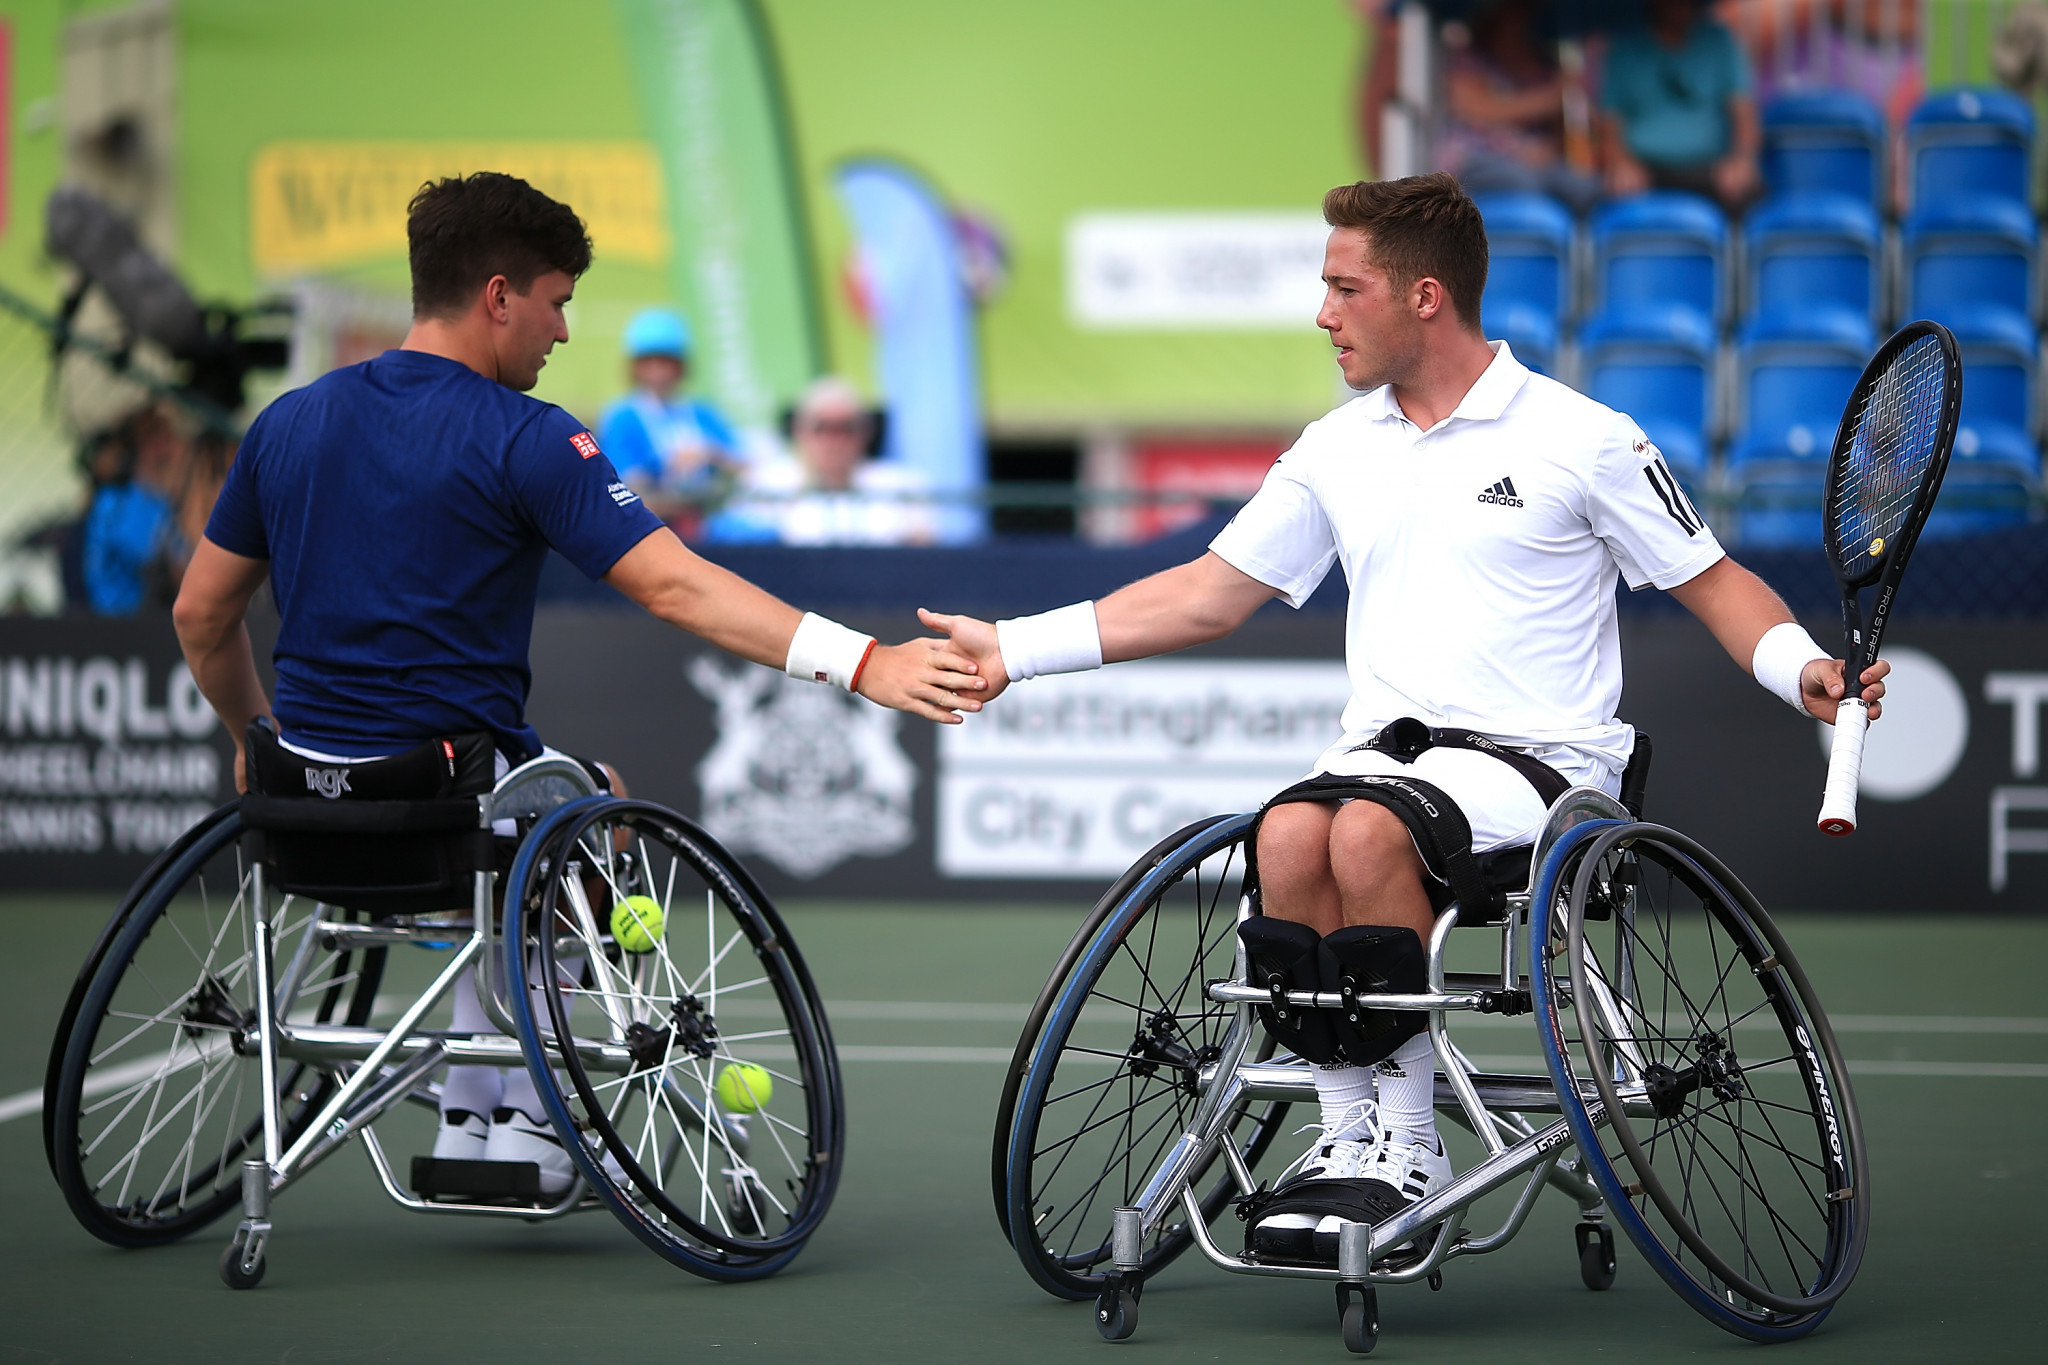 Bad weather puts paid to majority of US Open Wheelchair Tennis schedule on opening day